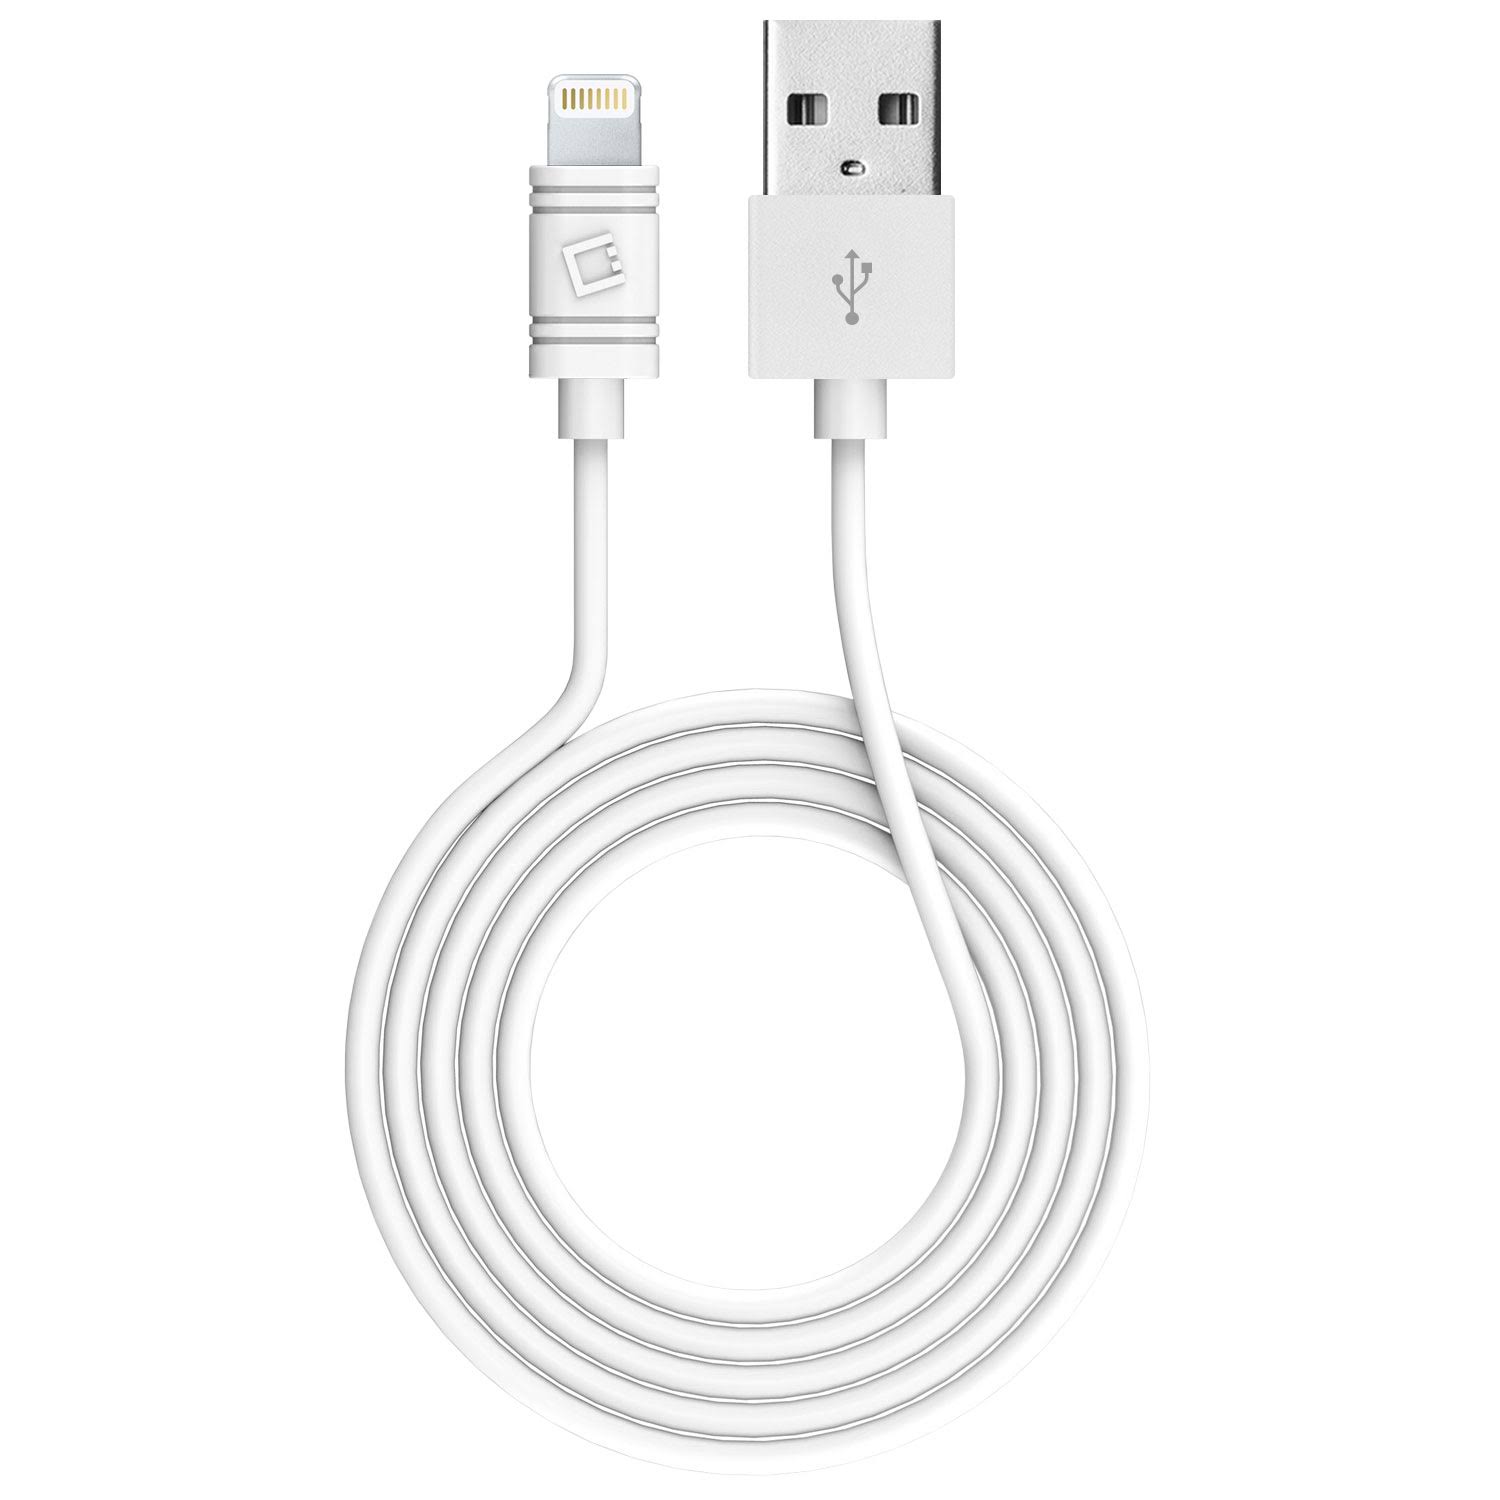 Apple Lightning 8 Pin to USB Sync & Data Charging Cable - White